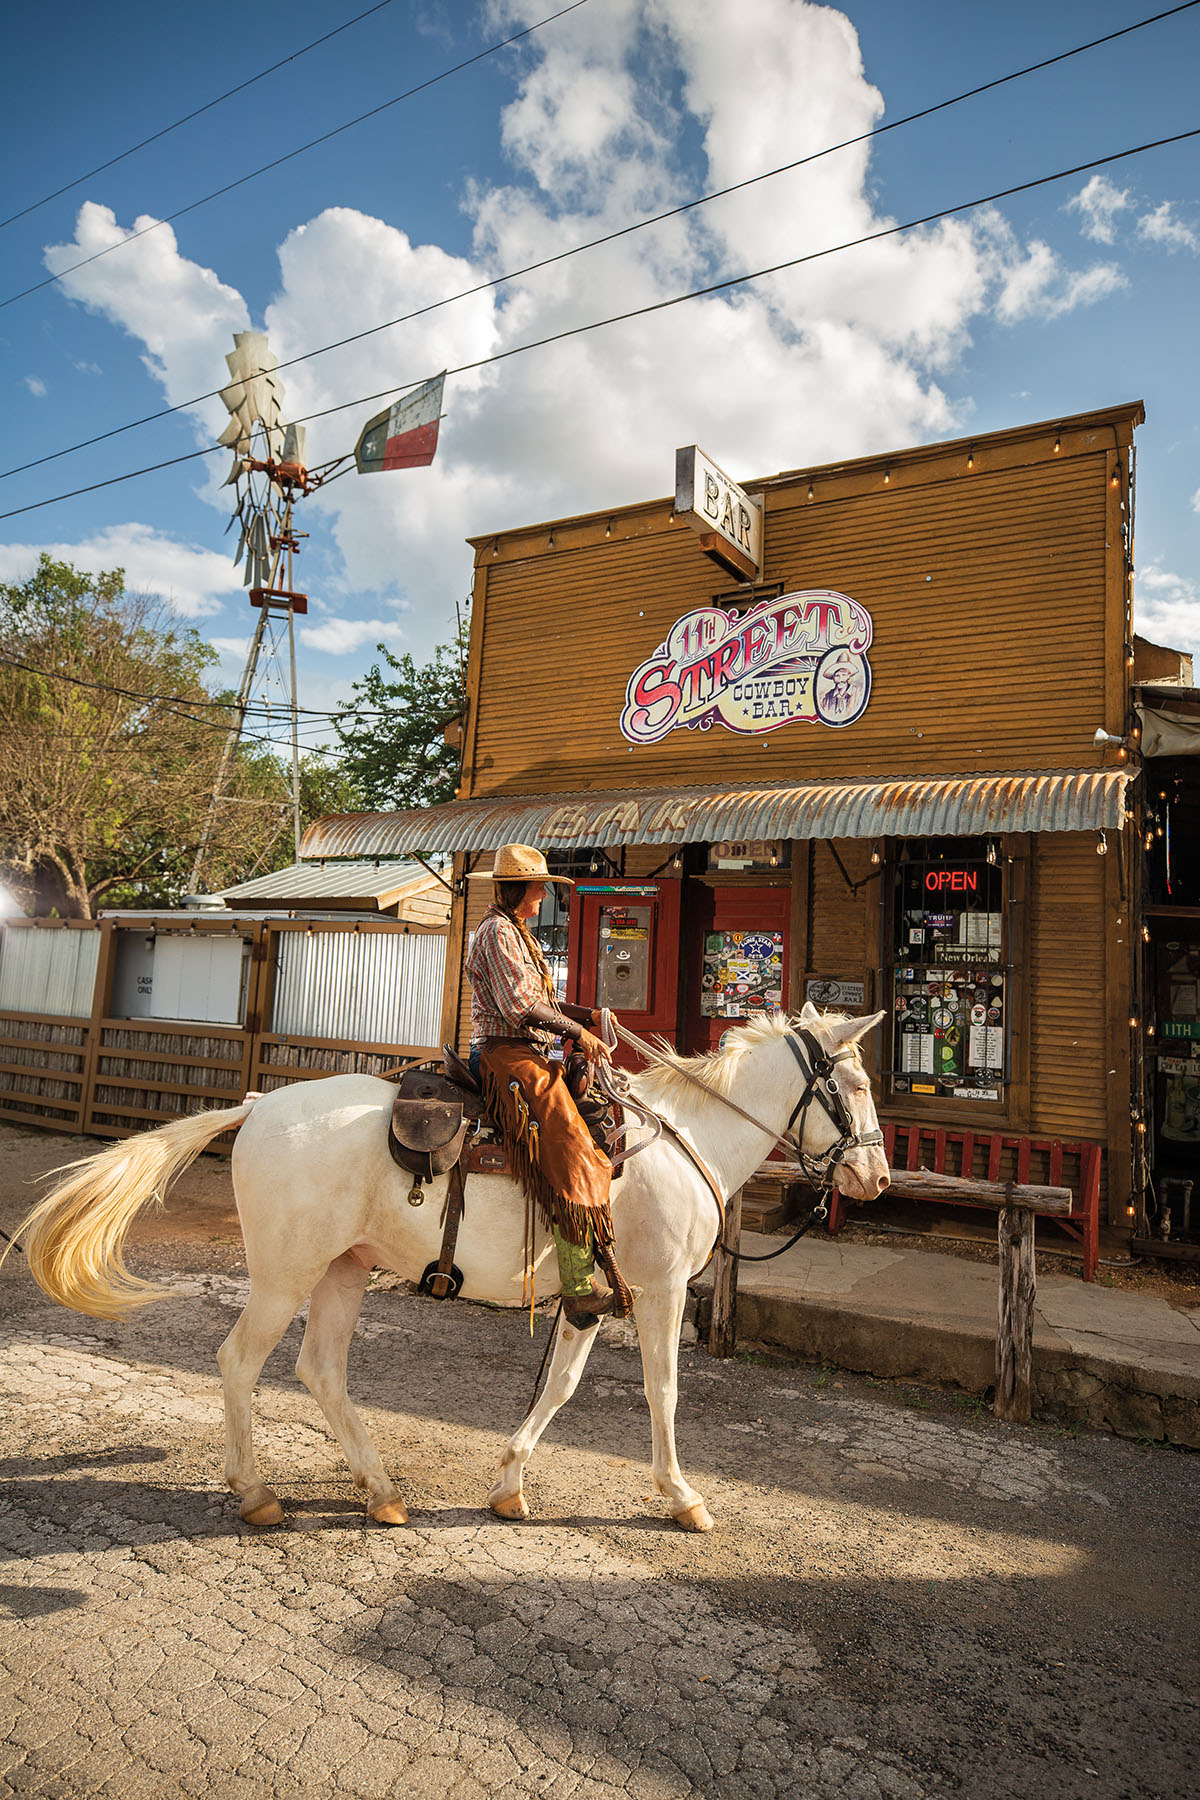 A woman in a tan cowboy hat and brown chaps rides a white horse in front of a wooden saloon reading "street cowboy bar"